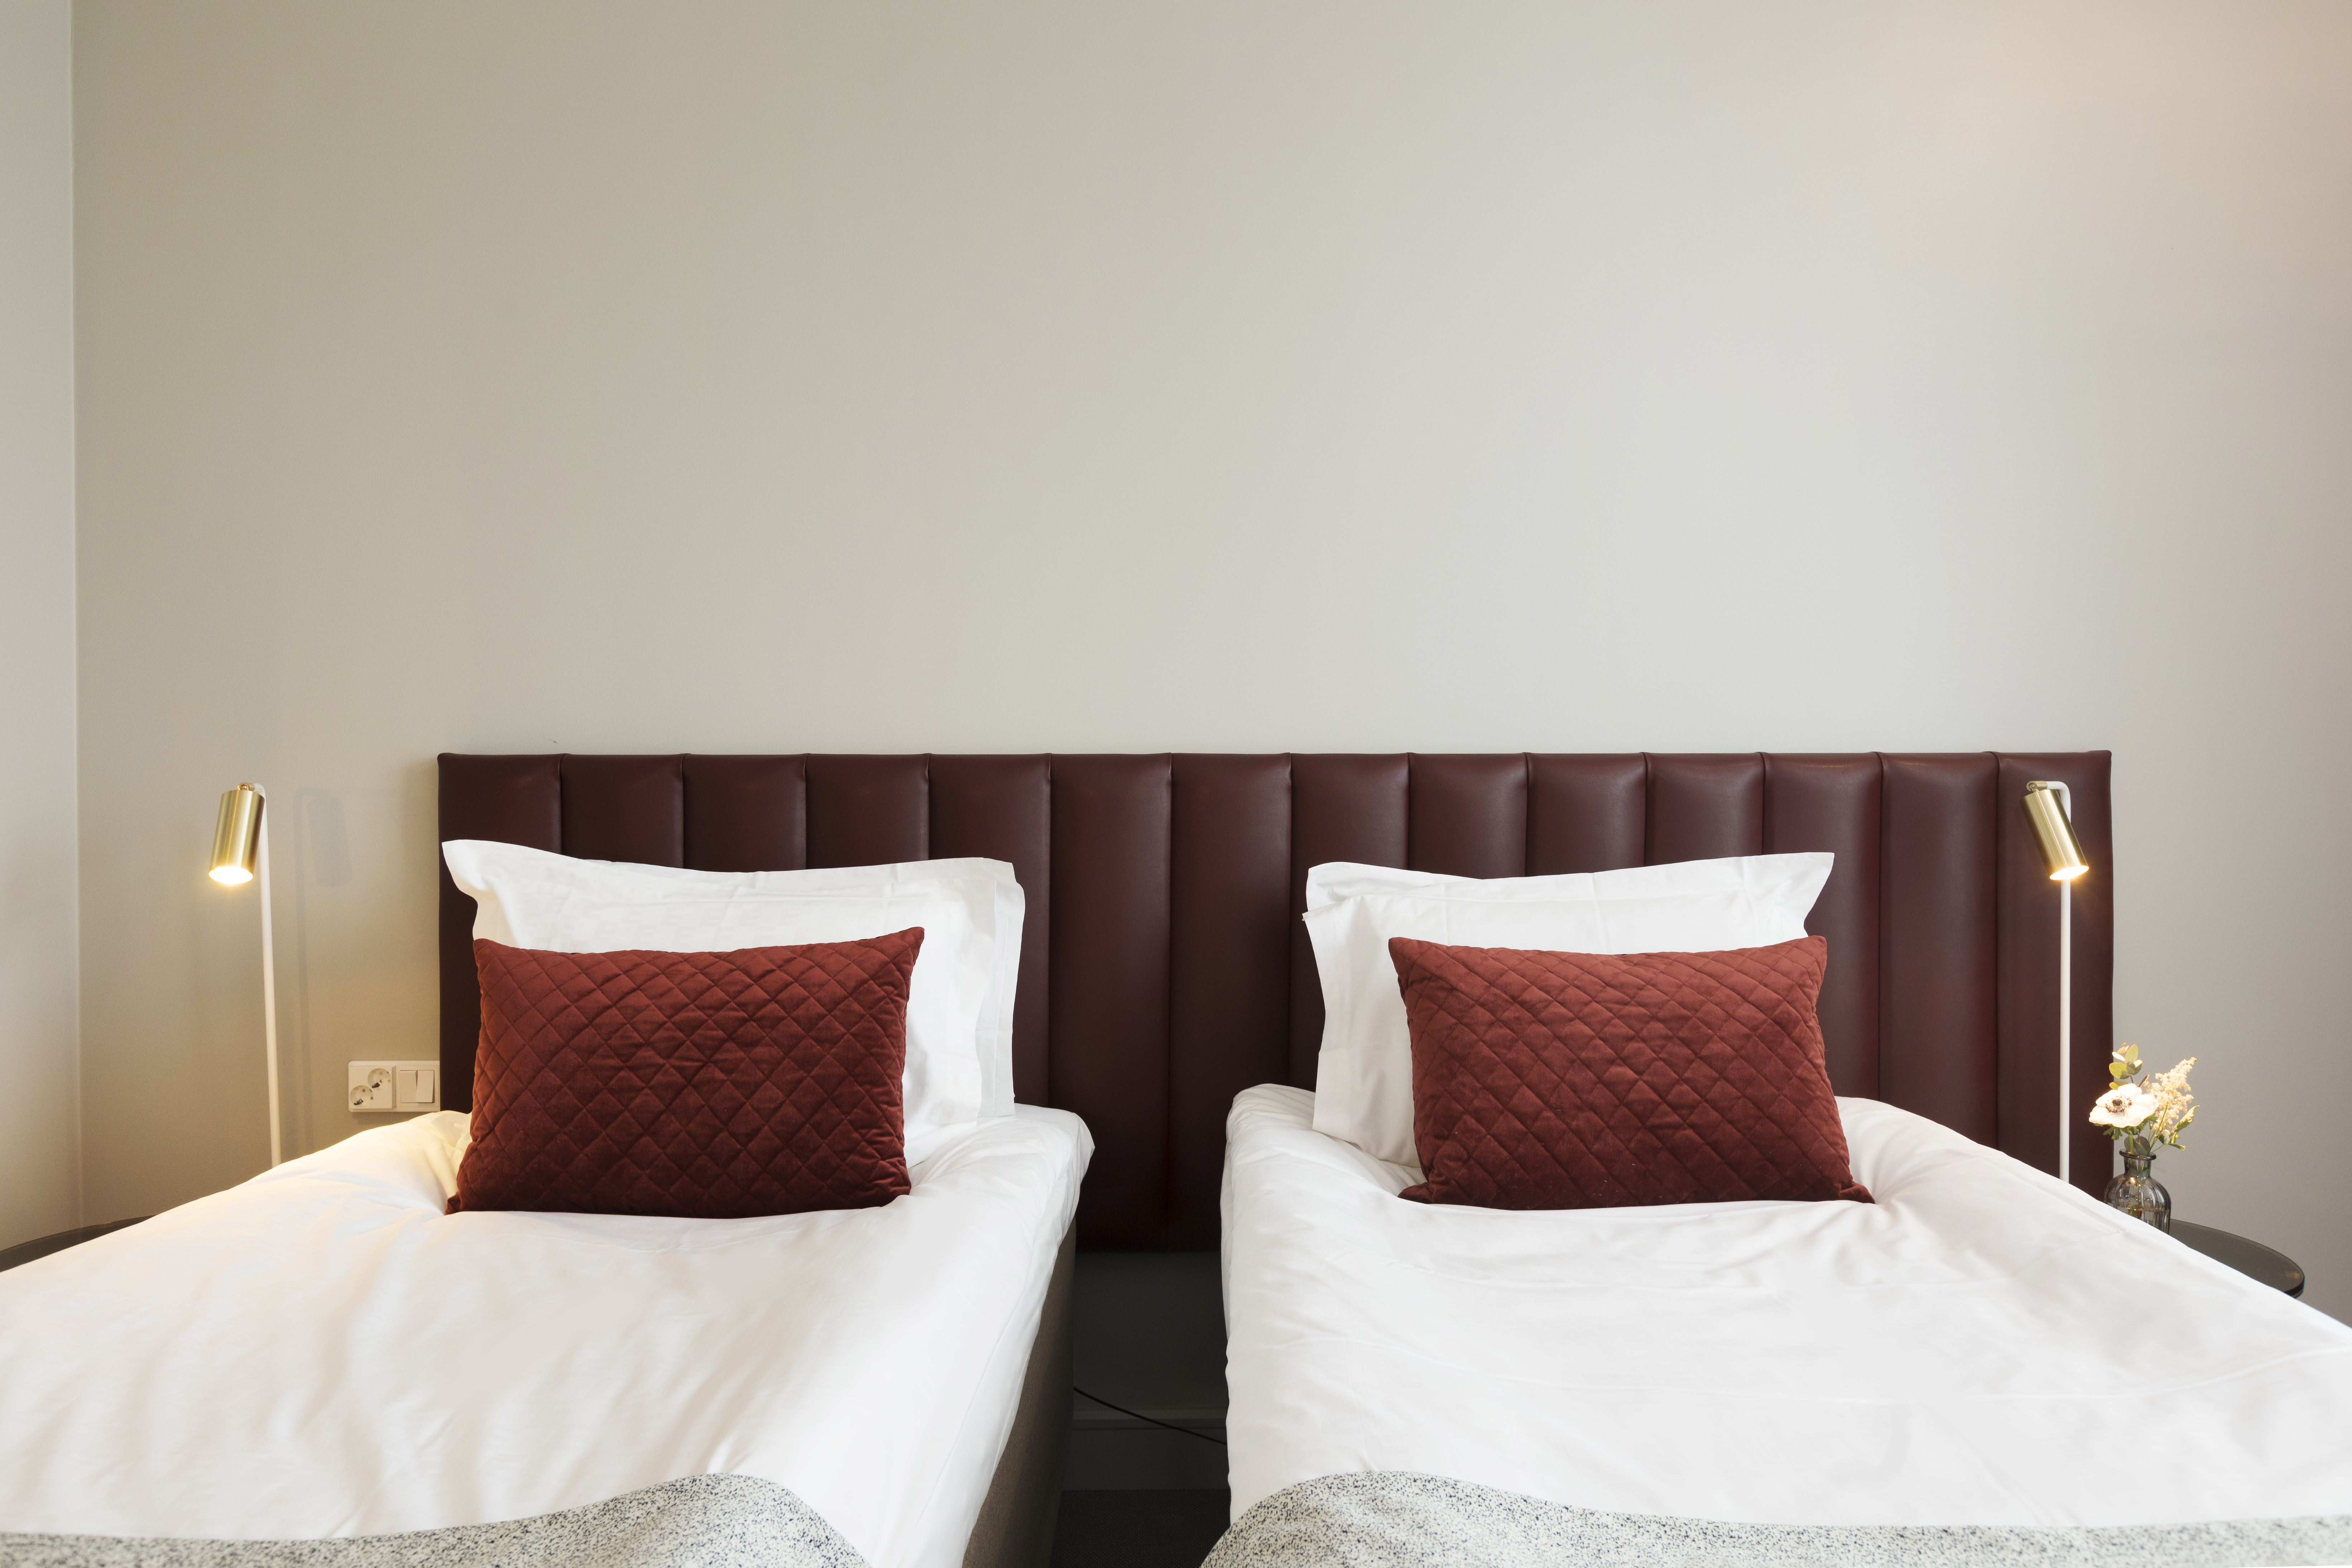 Bright hotel room with two single beds next to each other, burgundy headboard and small bedside lamps